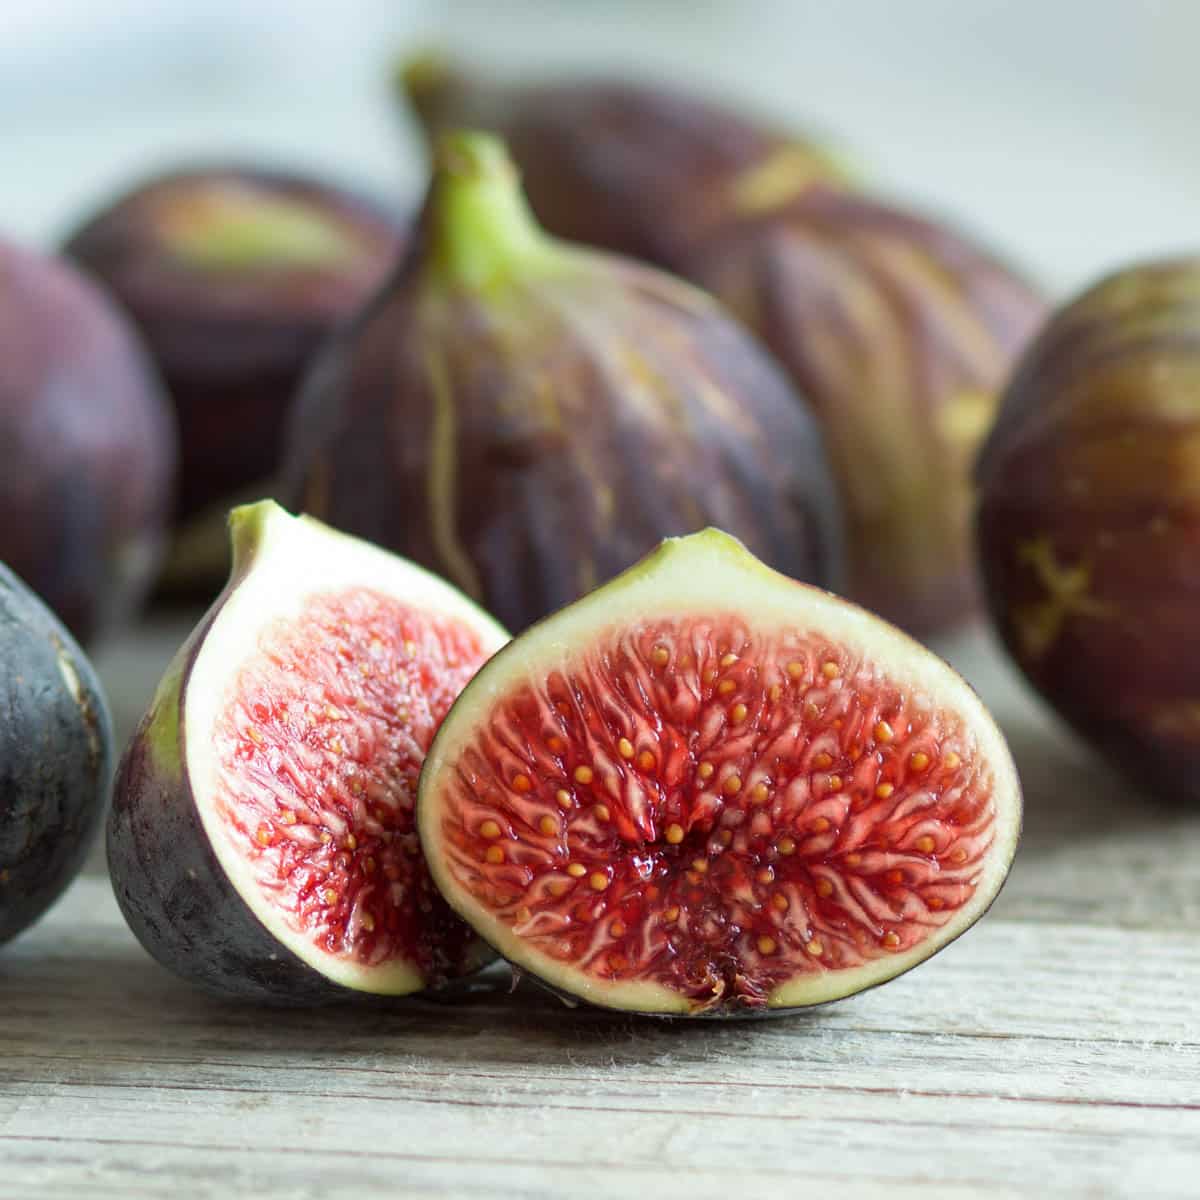 A ripe fig cut in half with other whole figs in the background on a wooden table.